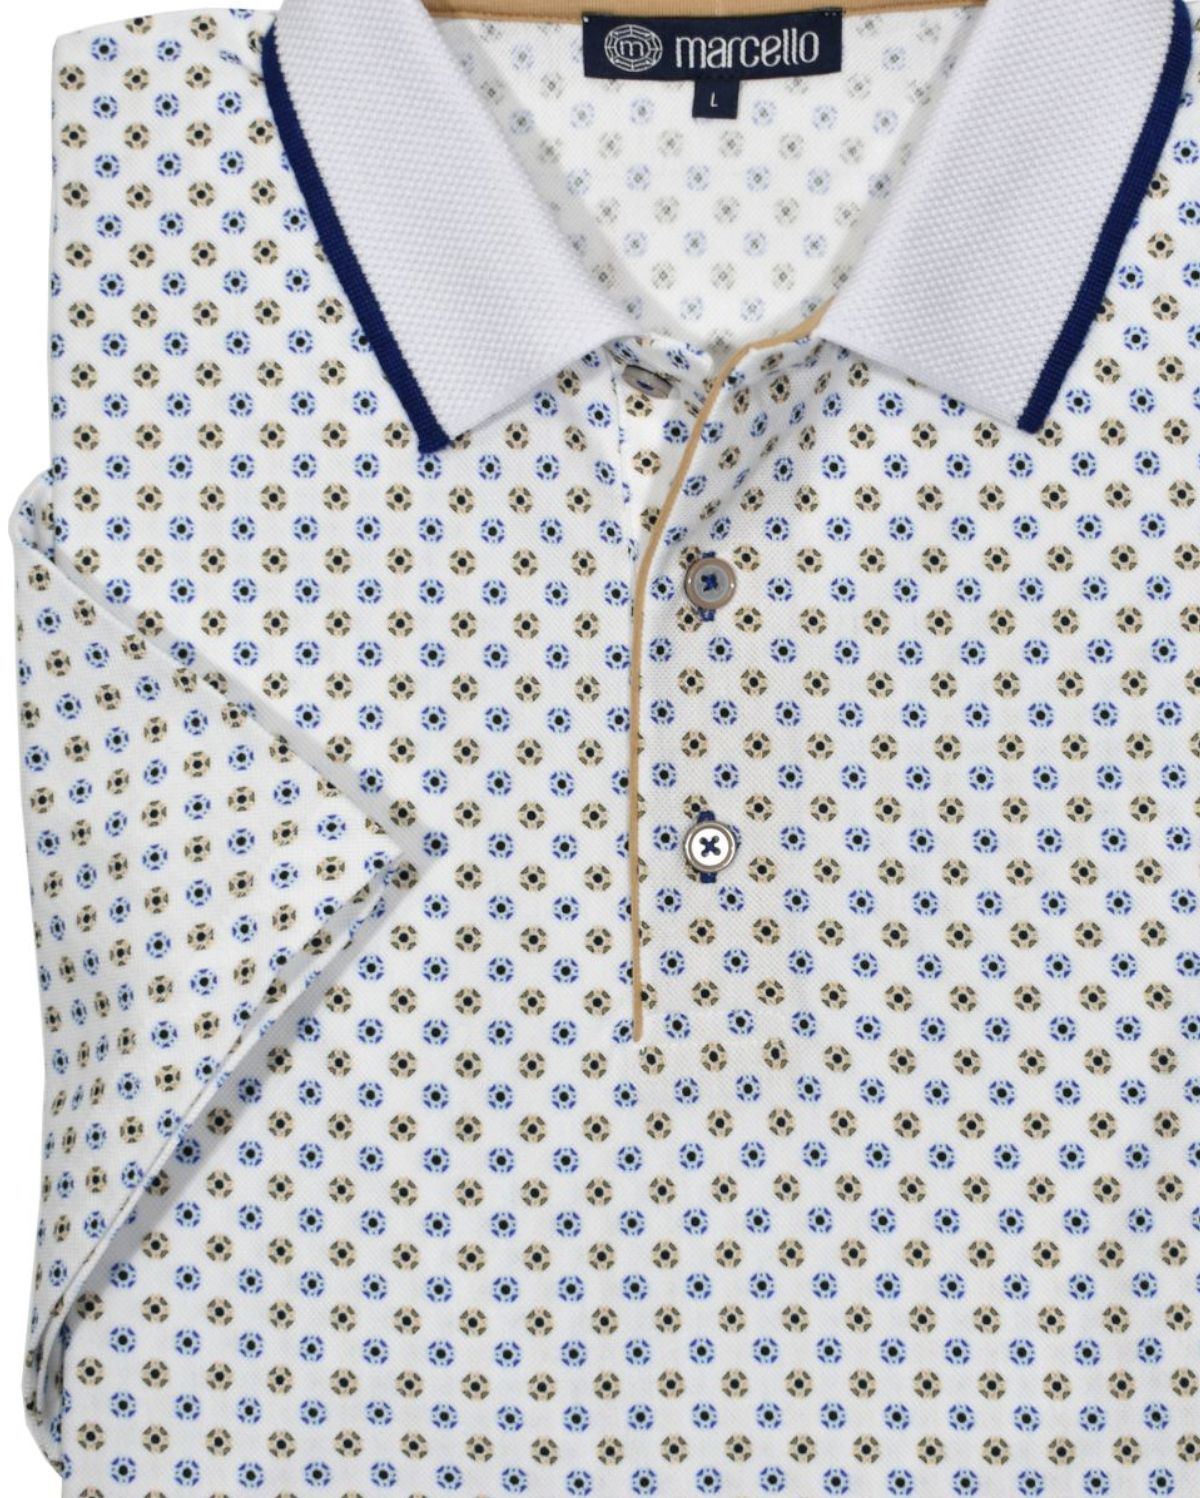 This ultra soft cotton pique polo looks timeless and feels lightweight. Its soft circular clear print blue and tan pattern, contrast trim fabric, open sleeves and custom buttons make it unique and stylish. Enjoy its classic fit and timeless look.